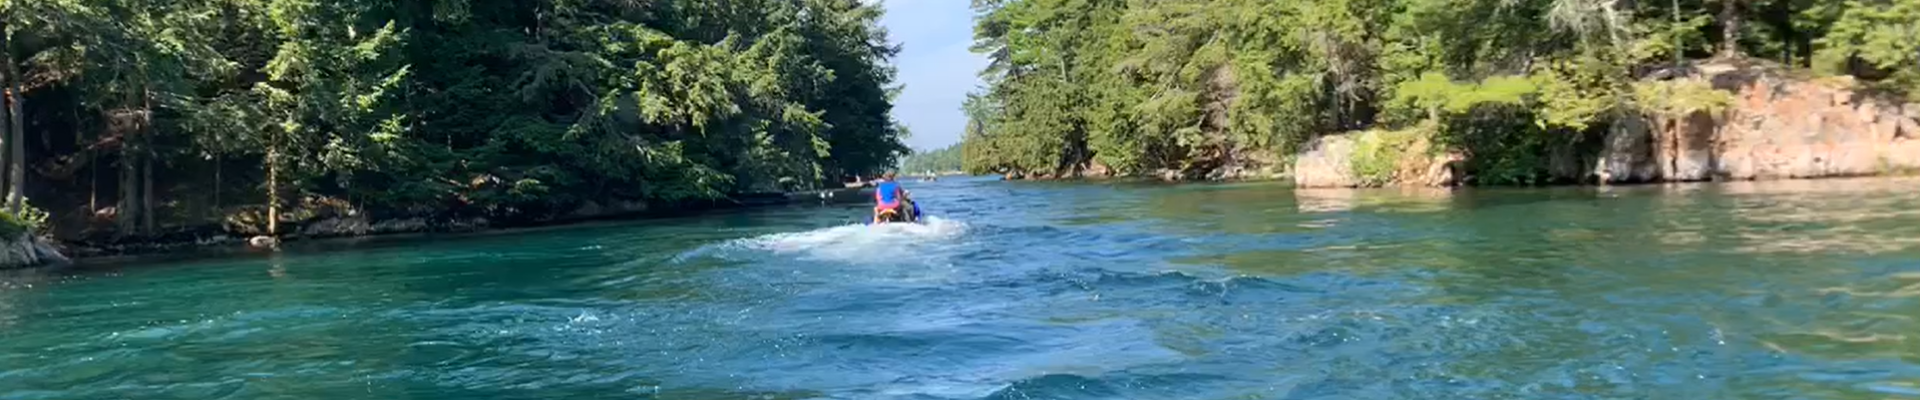 Jet ski in the 1000 Islands on the River passing between two islands